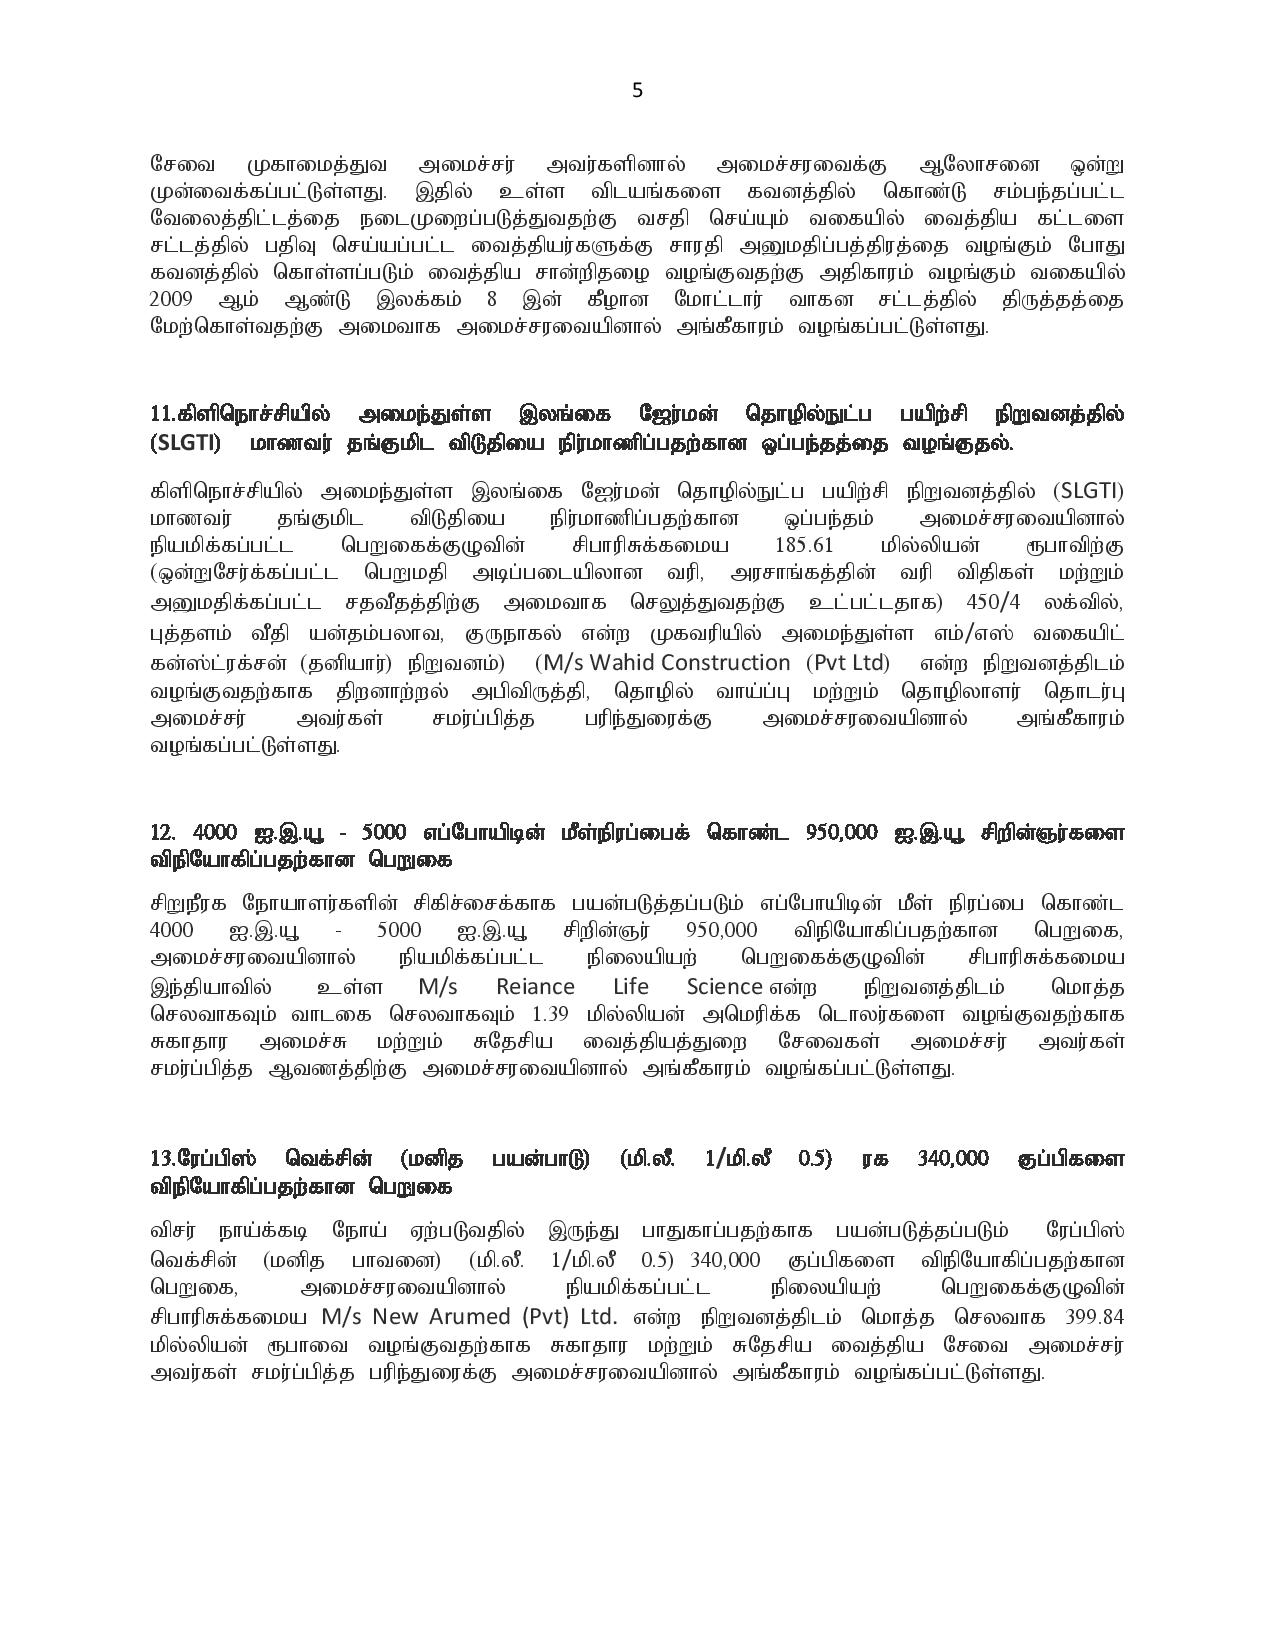 05.02.2020 Cabinet Tamil page 005